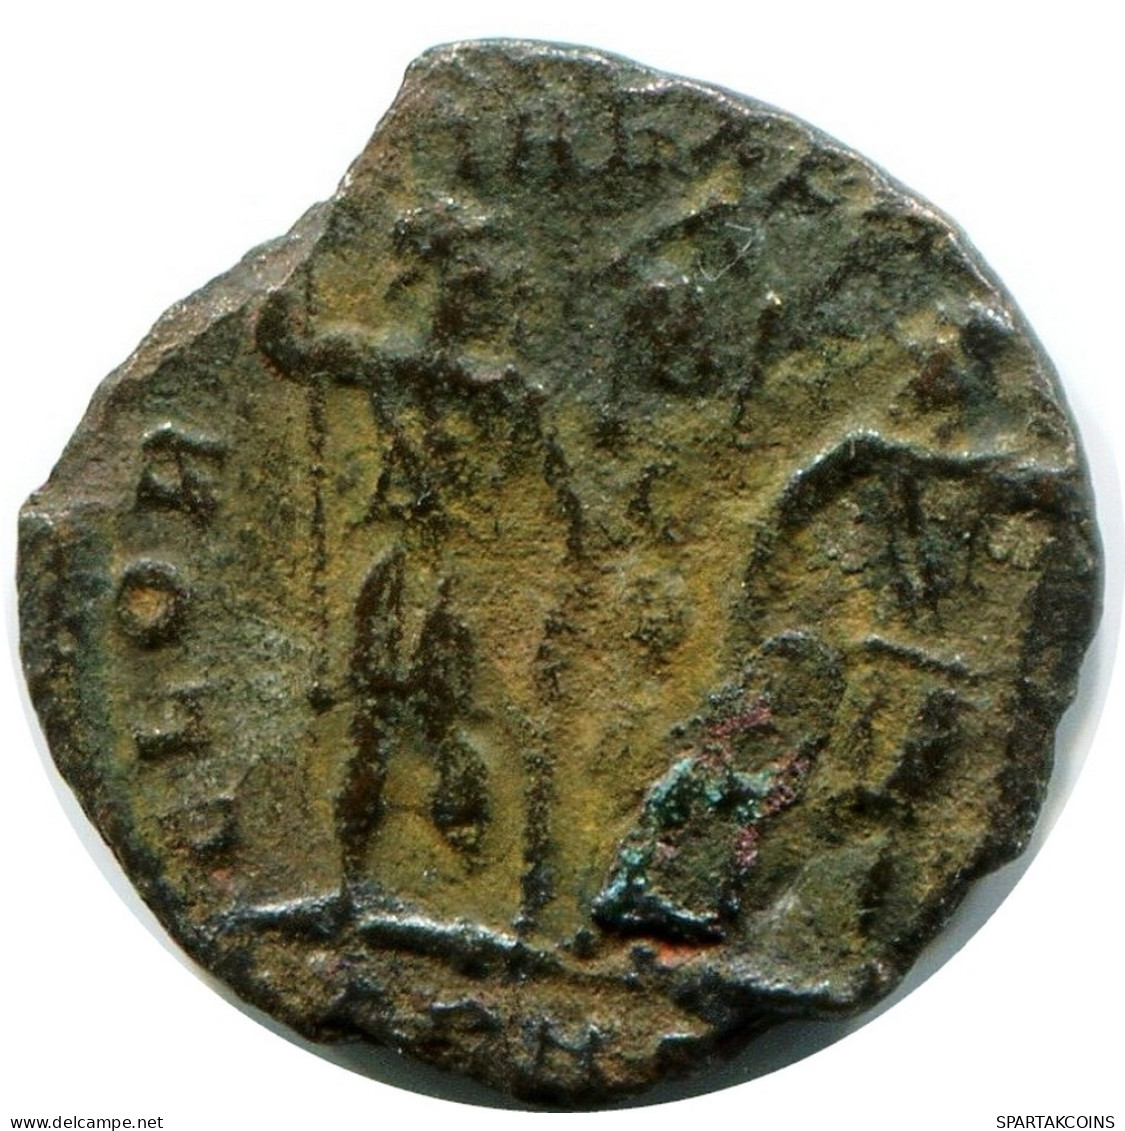 CONSTANS MINTED IN NICOMEDIA FROM THE ROYAL ONTARIO MUSEUM #ANC11725.14.E.A - L'Empire Chrétien (307 à 363)